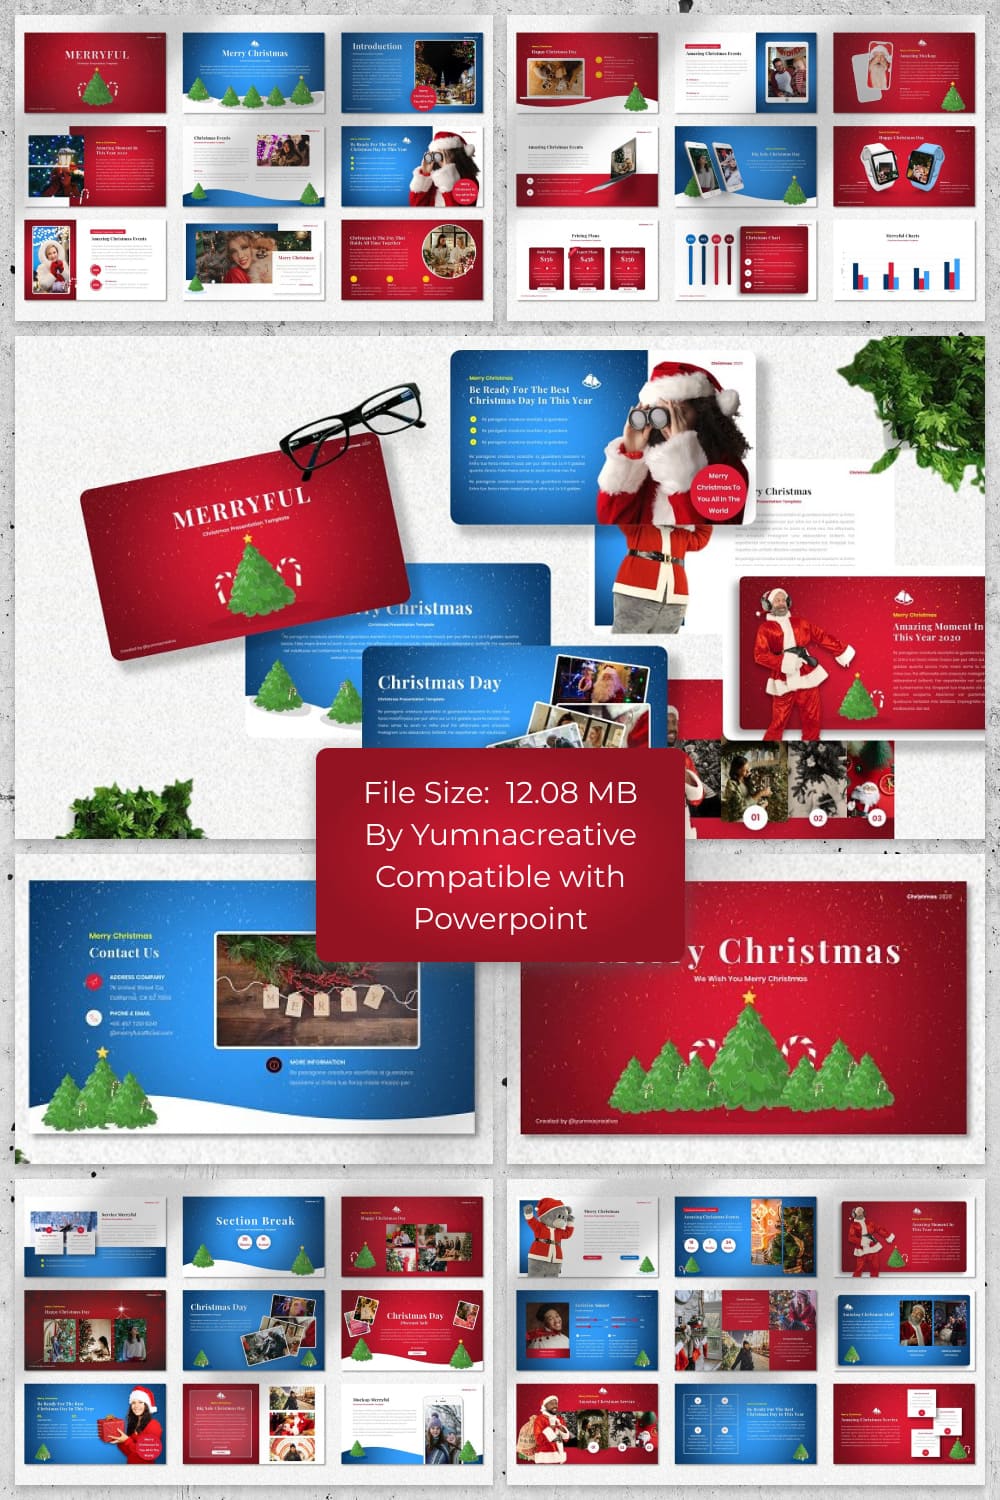 01 Merryful - Christmas Powerpoint by MasterBundles Pinterest Collage Image.